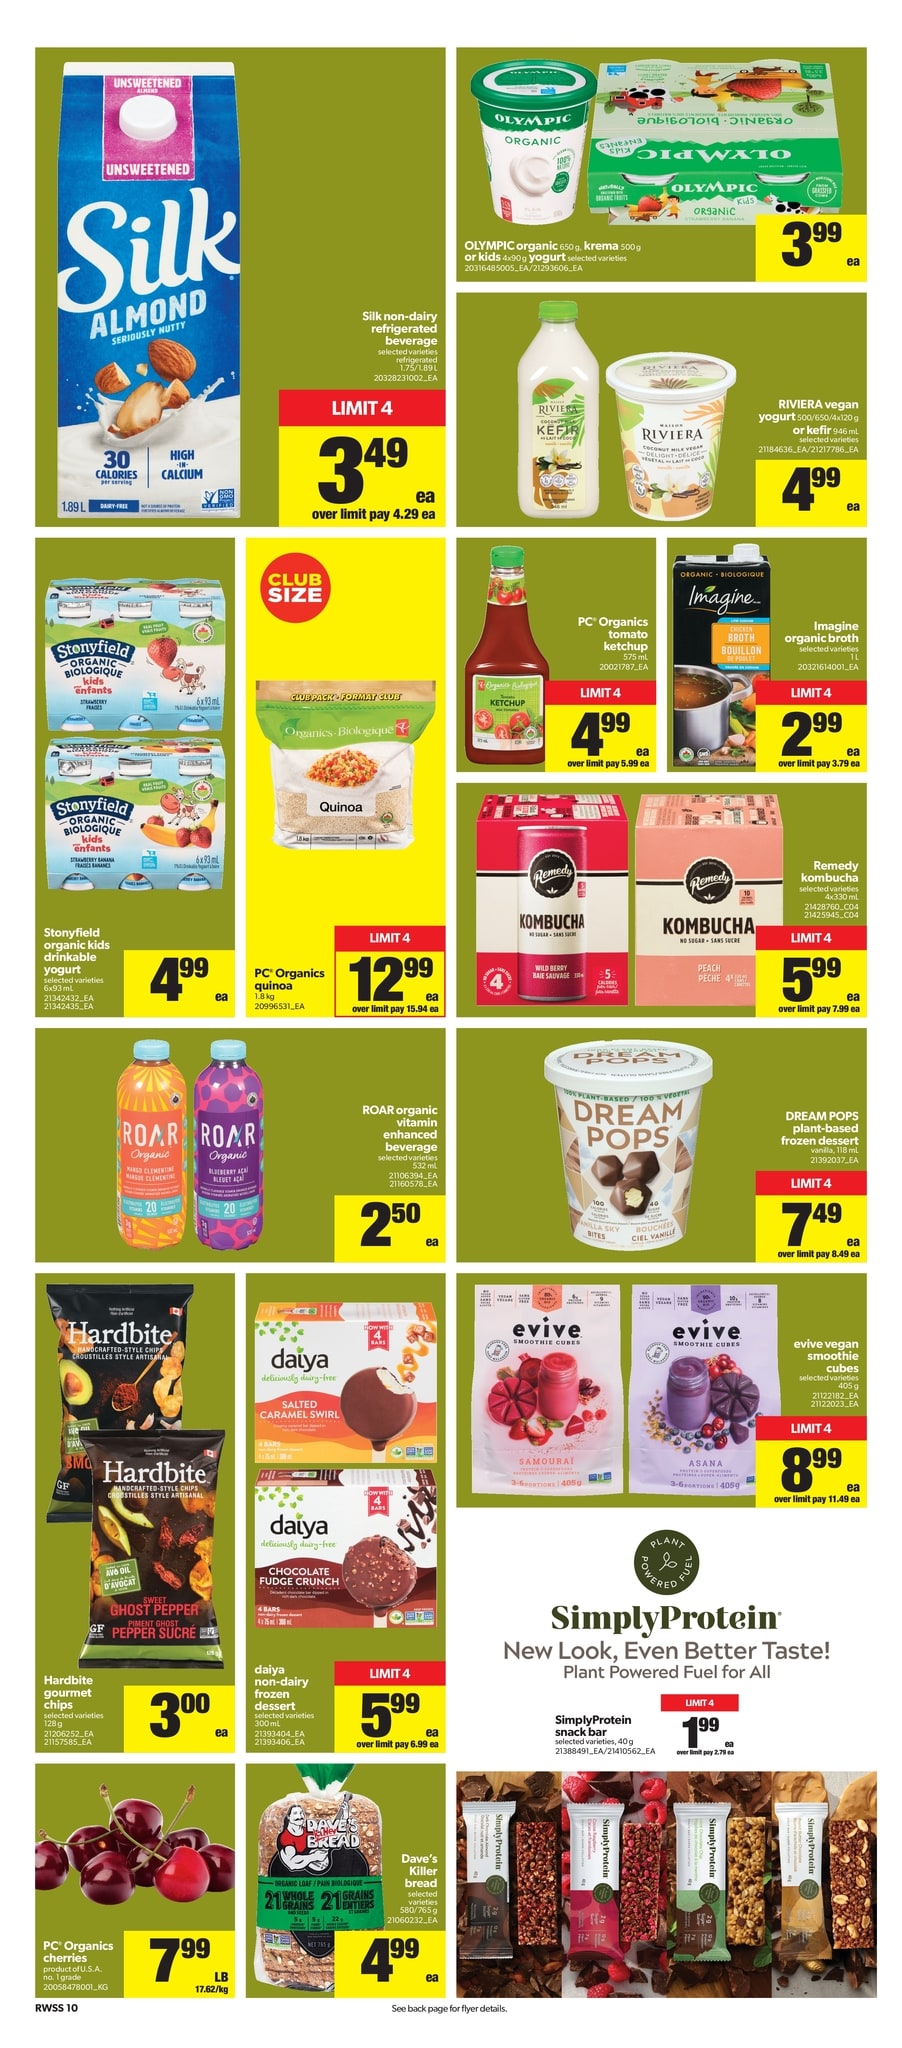 Real Canadian Superstore Western Canada - Weekly Flyer Specials - Page 11